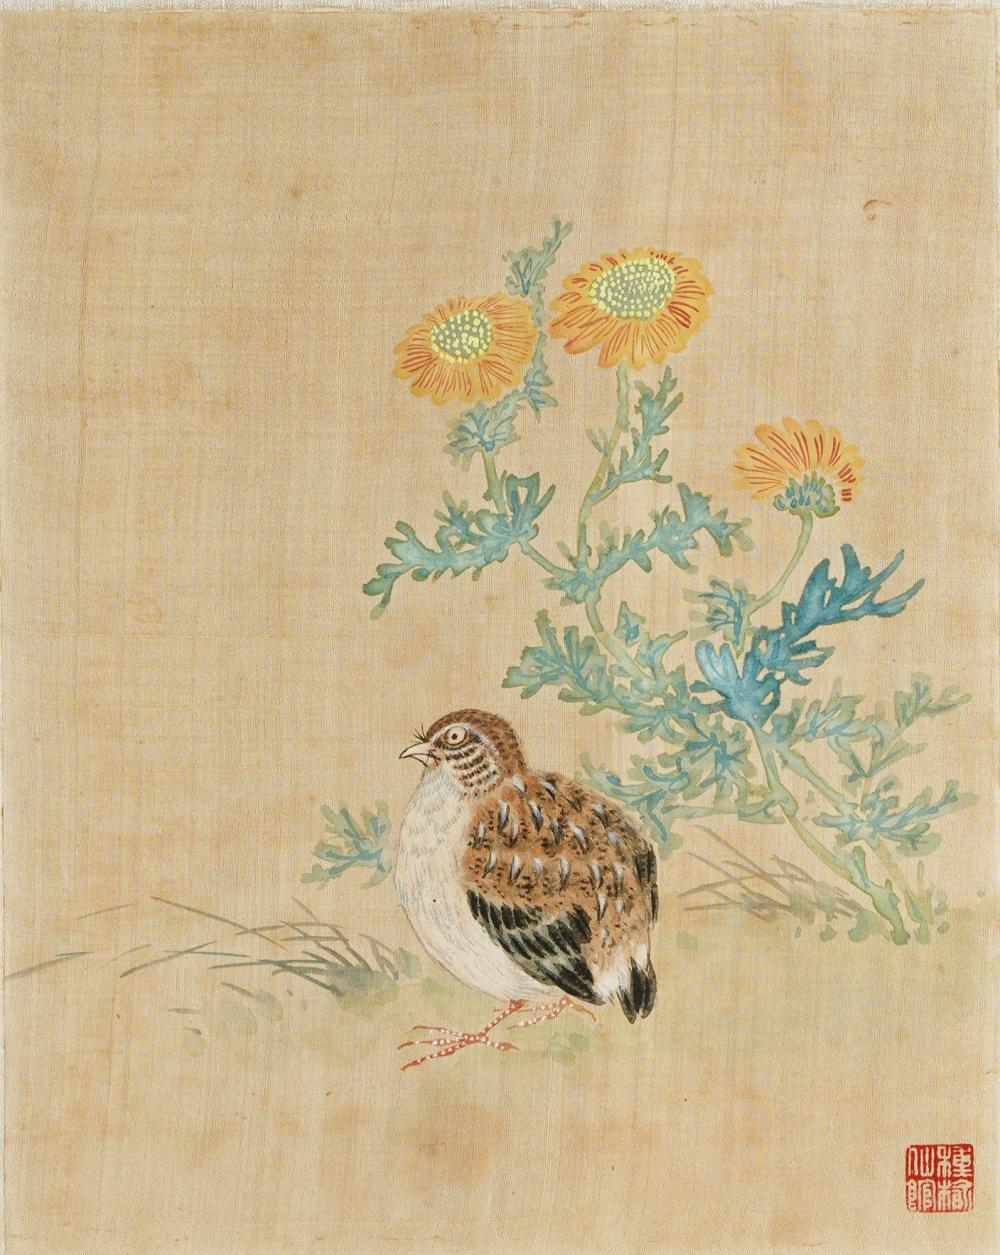 CHINESE PAINTING OF A QUAILpainted